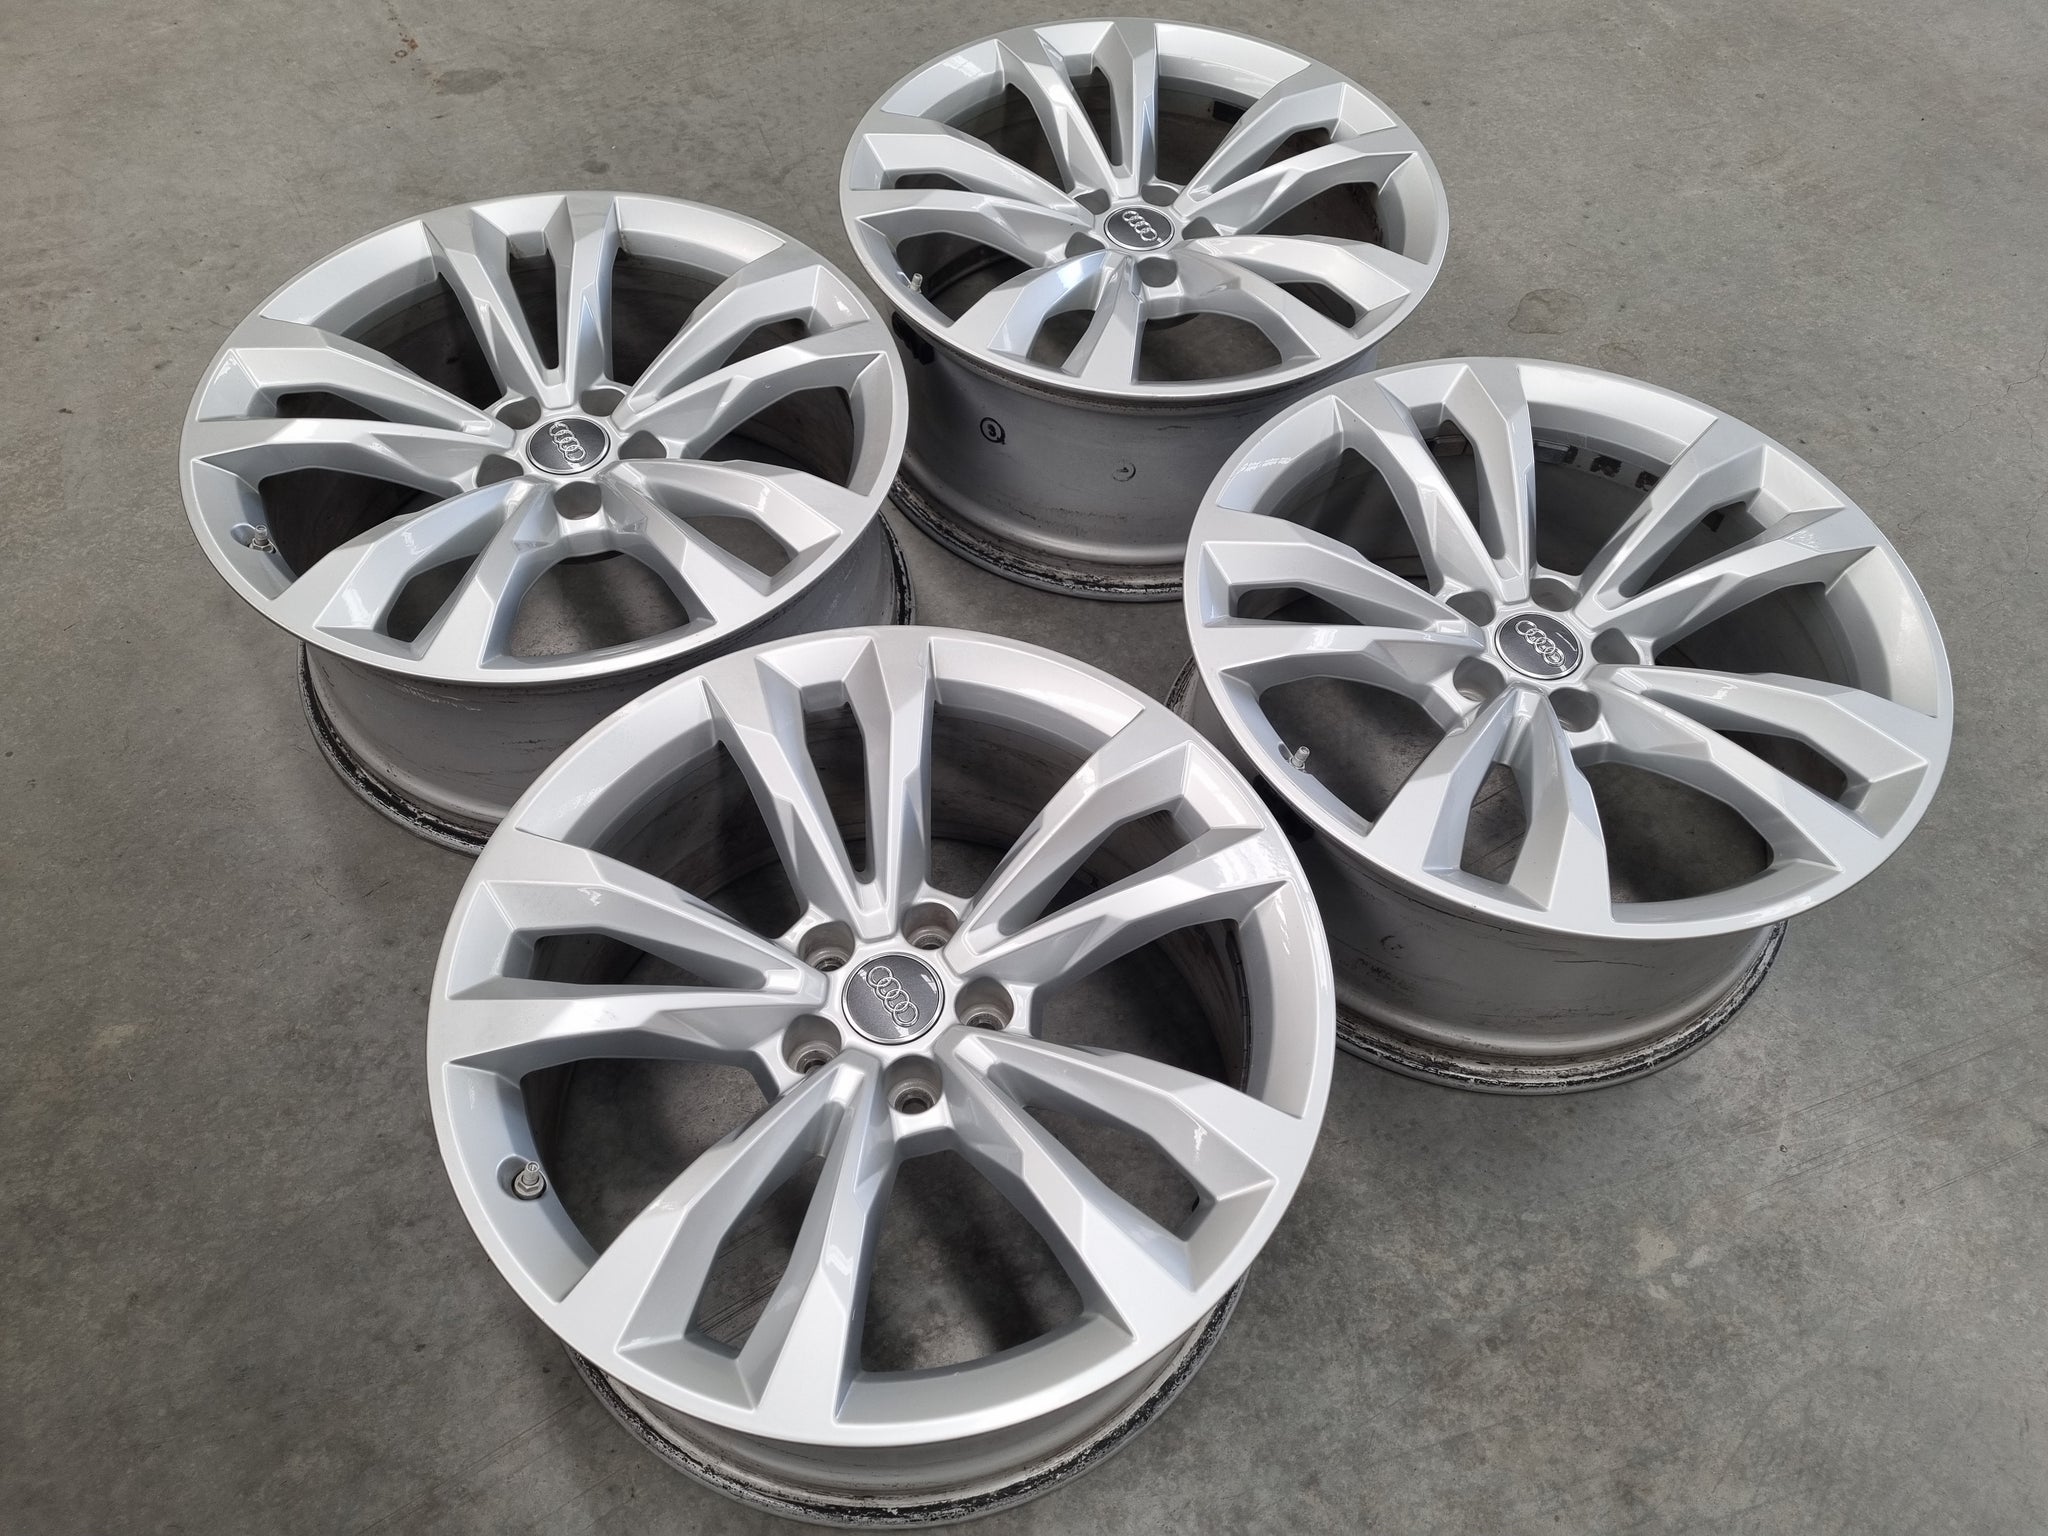 Load image into Gallery viewer, Genuine AUDI Q7 2018 Model 4M 19 Inch Alloy Wheels Set of 4
